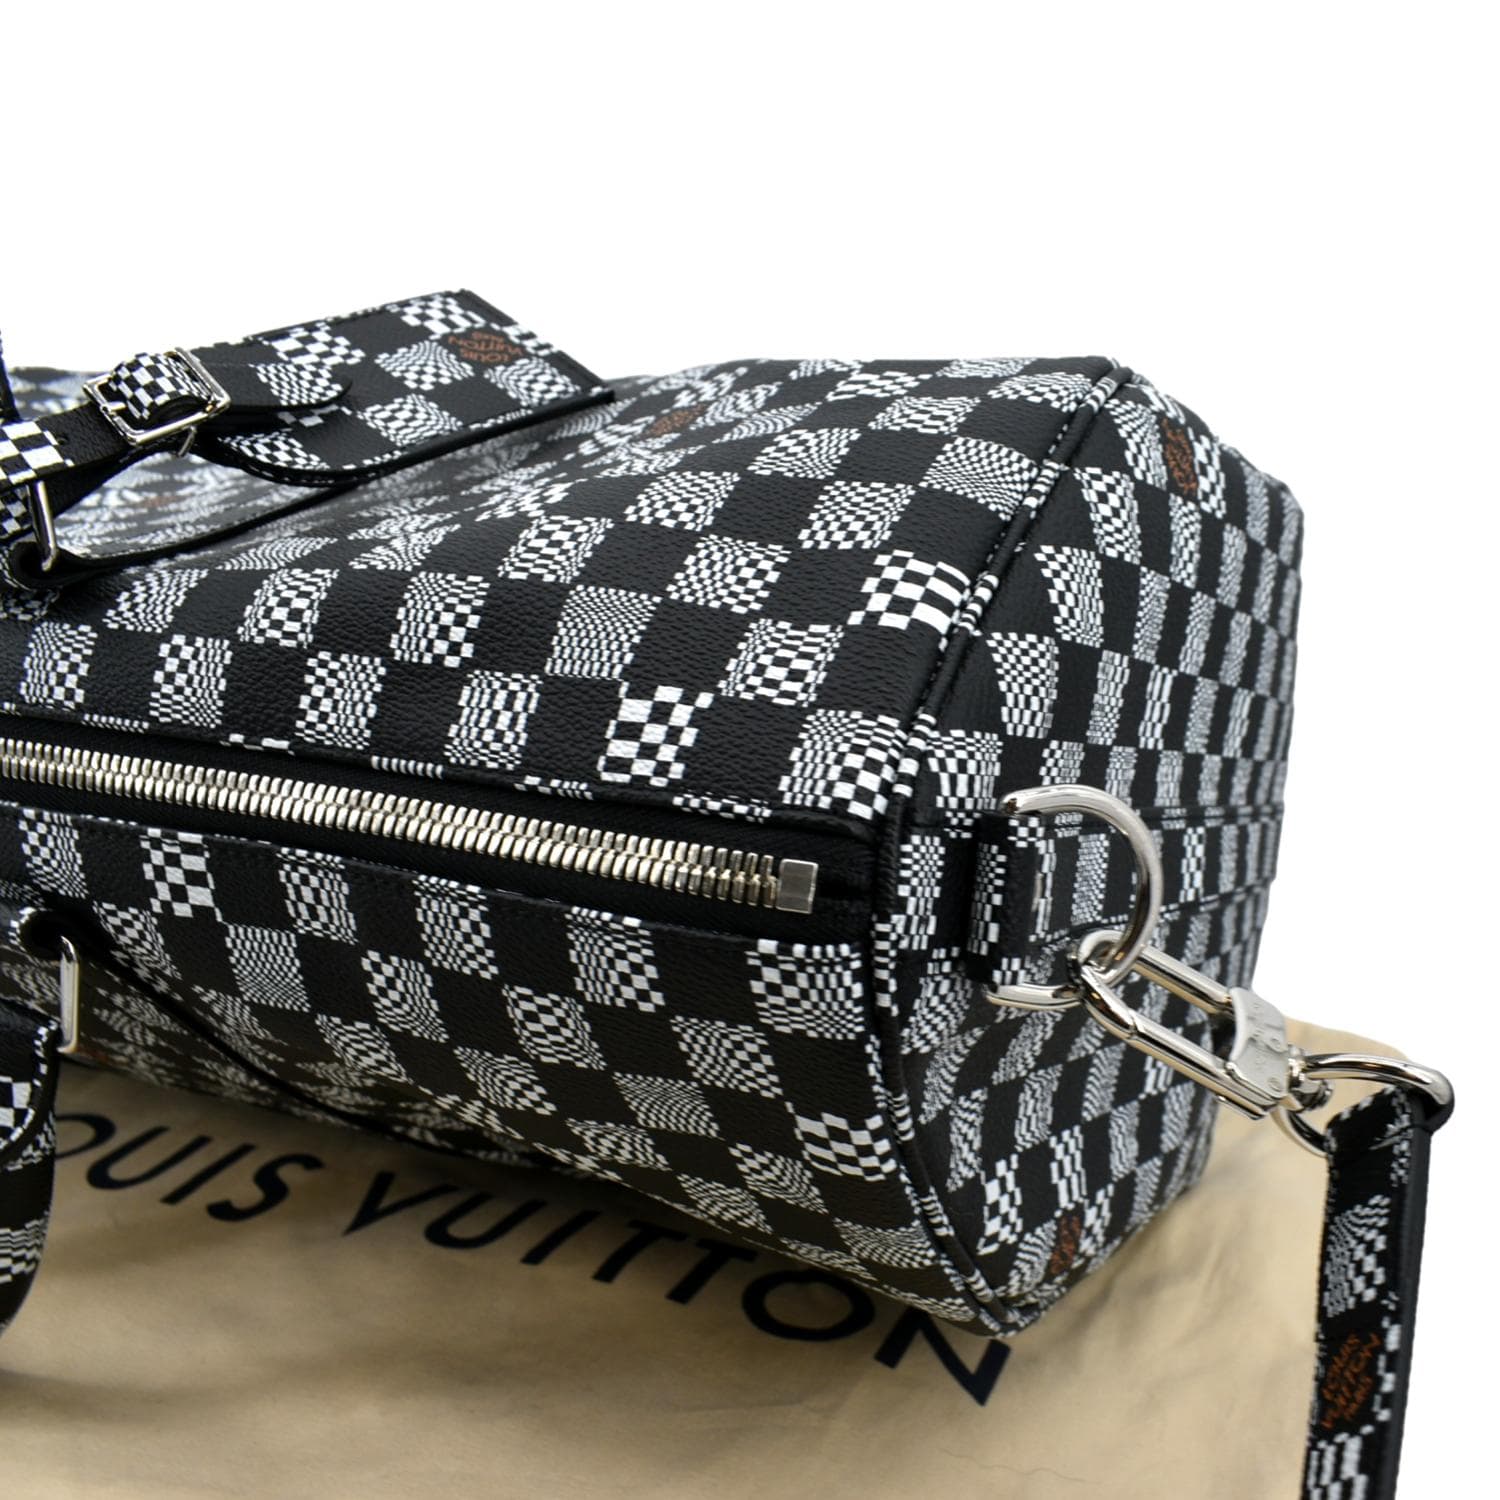 Louis Vuitton Black and White Distorted Damier Keepall Bandoulière